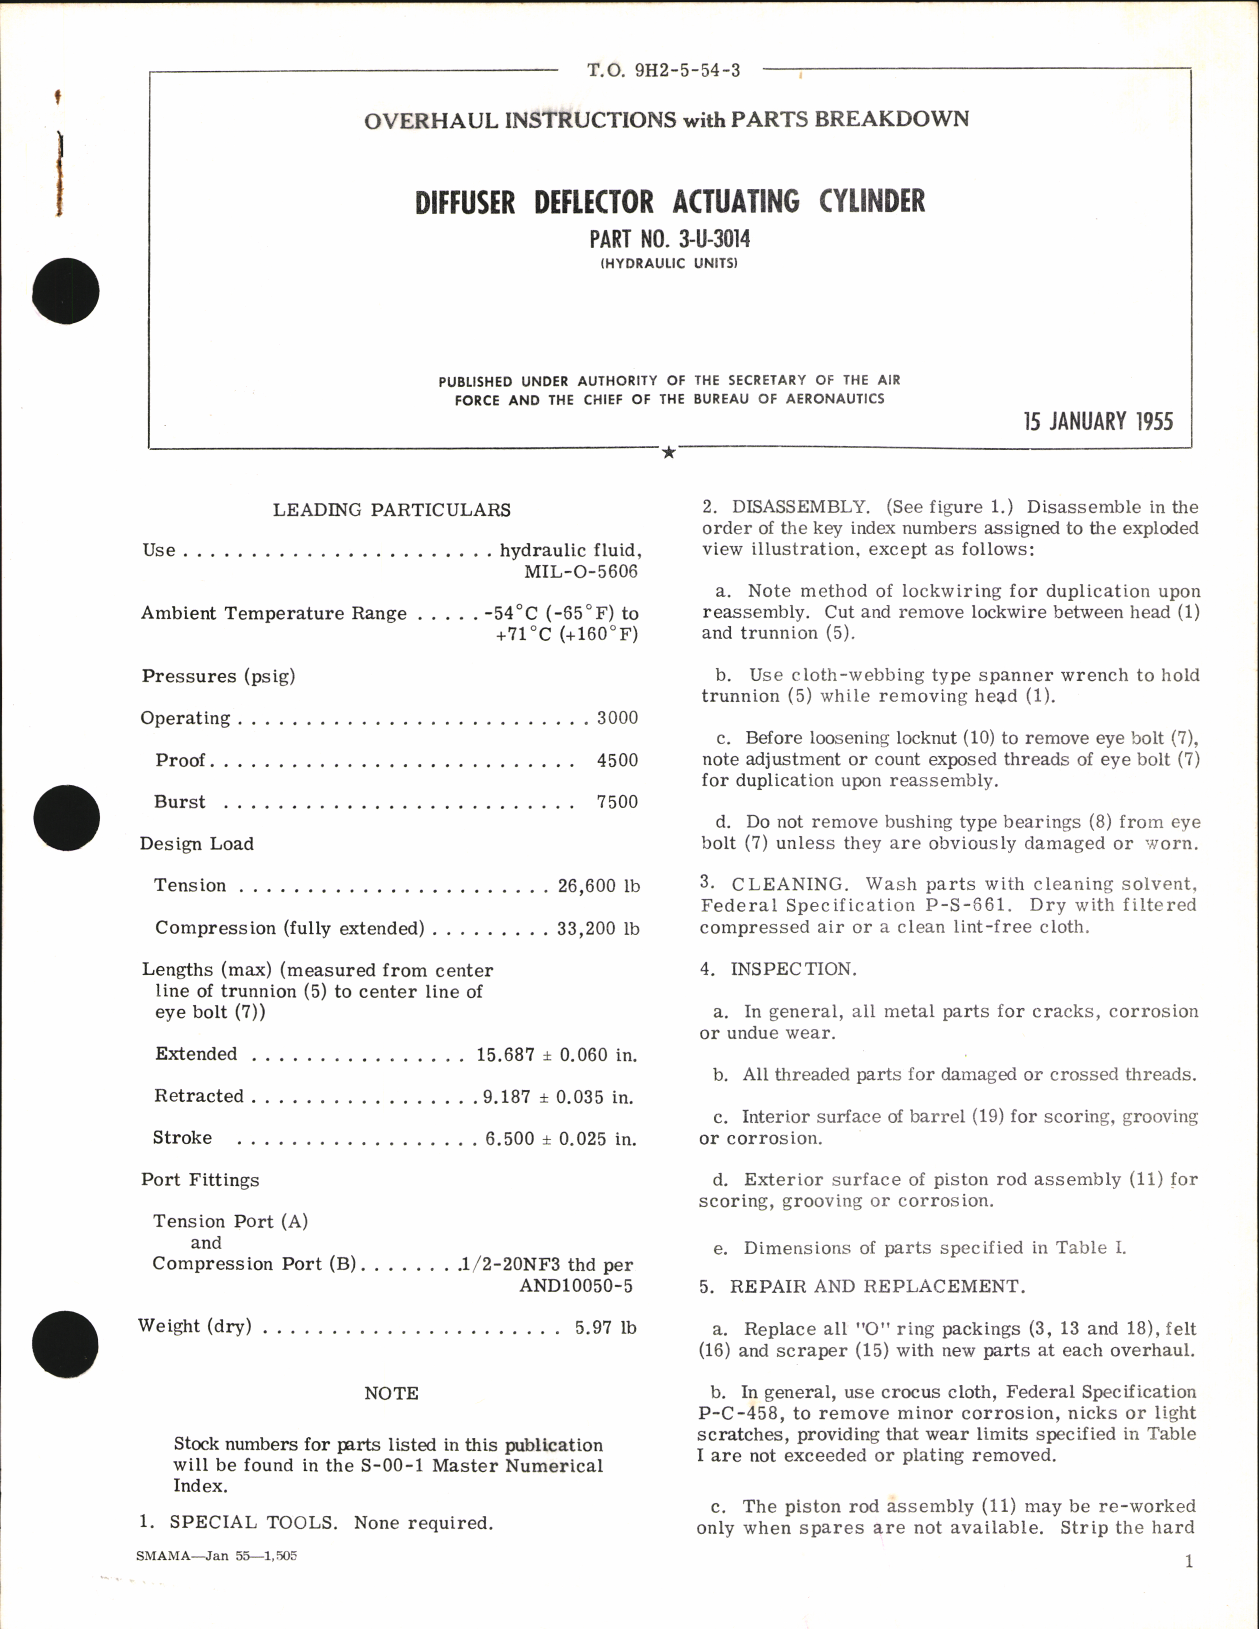 Sample page 1 from AirCorps Library document: Overhaul Instructions with Parts Breakdown for Diffuser Deflector Actuating Cylinder Part NO. 3-U-3014